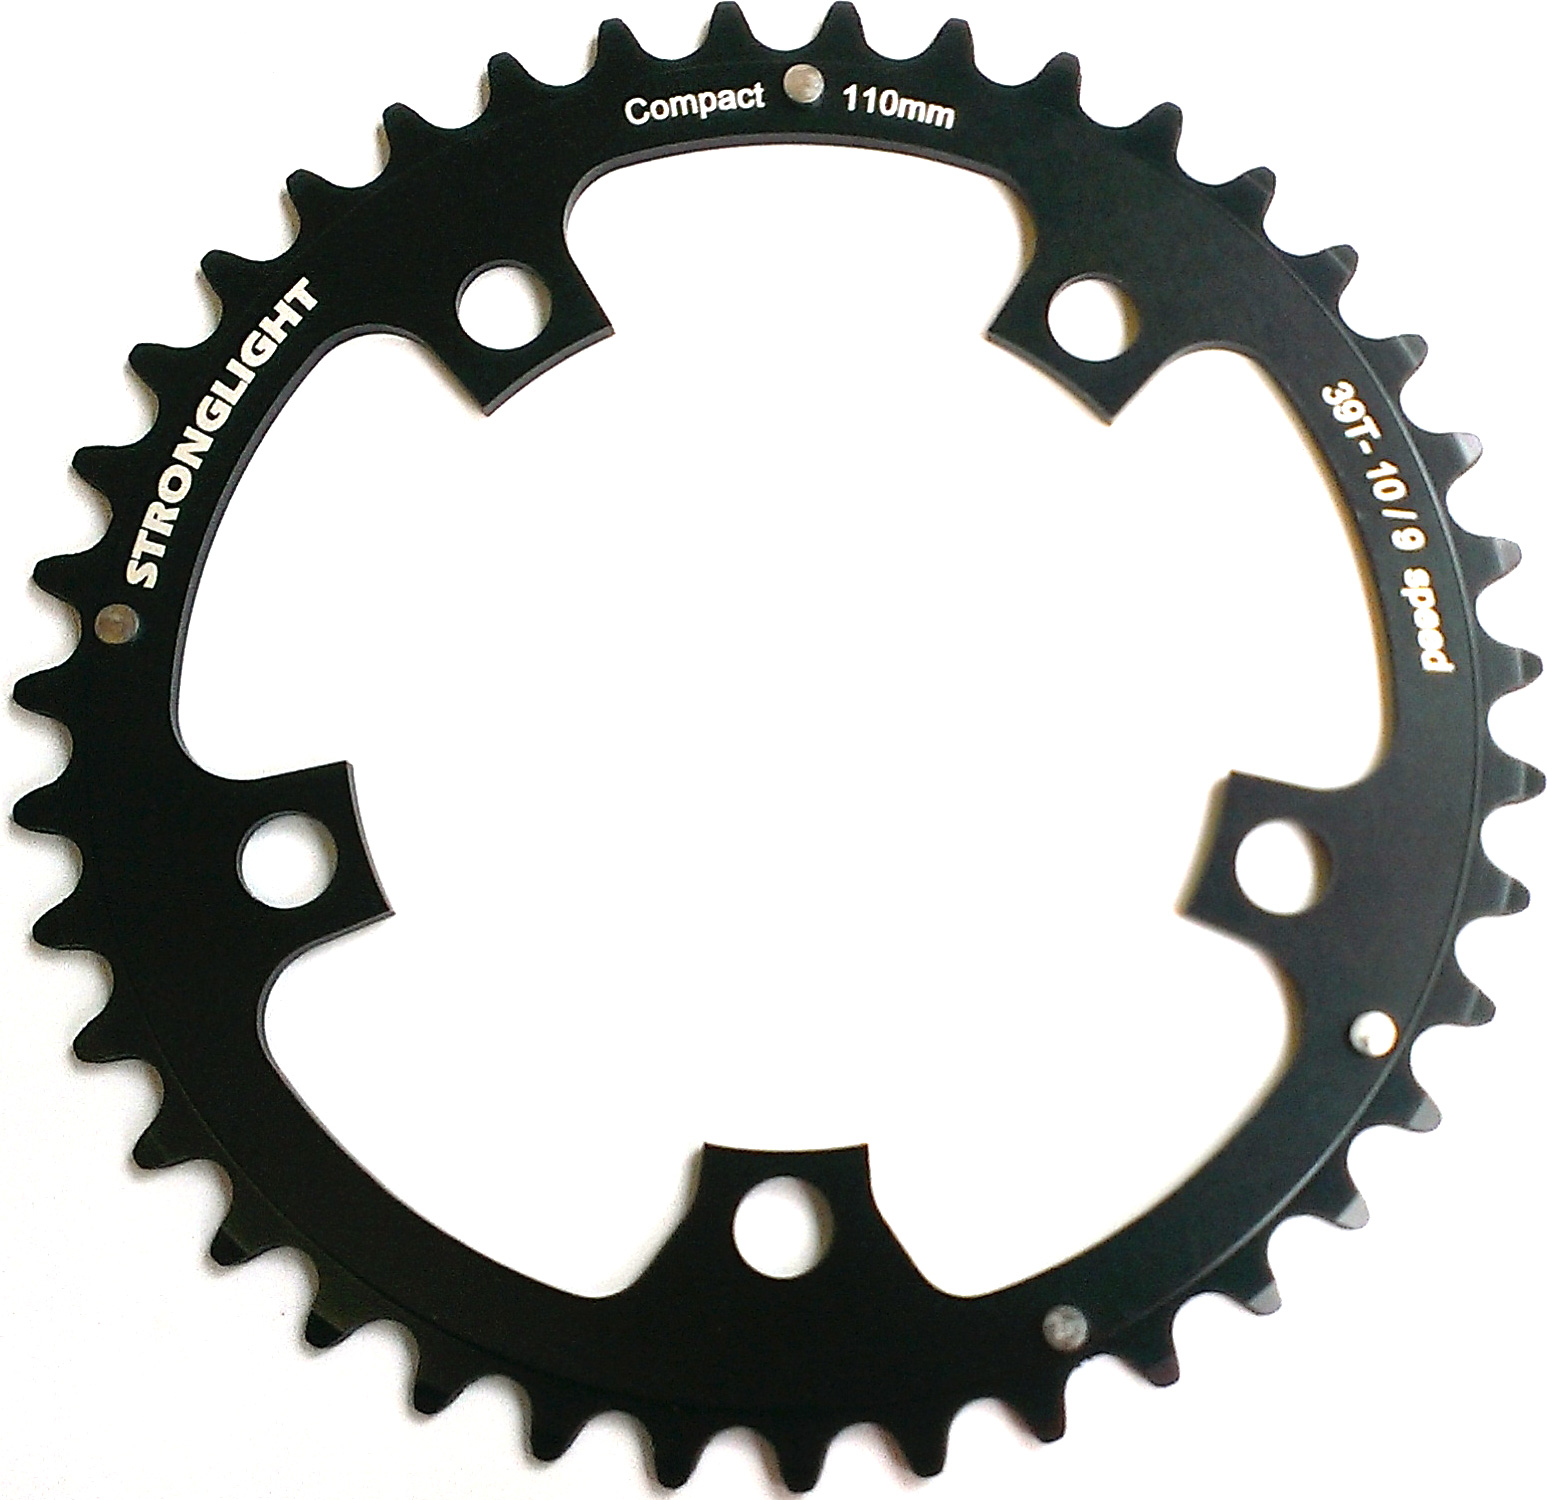 RD11040Z Stronglight 40T Black 5-Arm/110mm Chainring